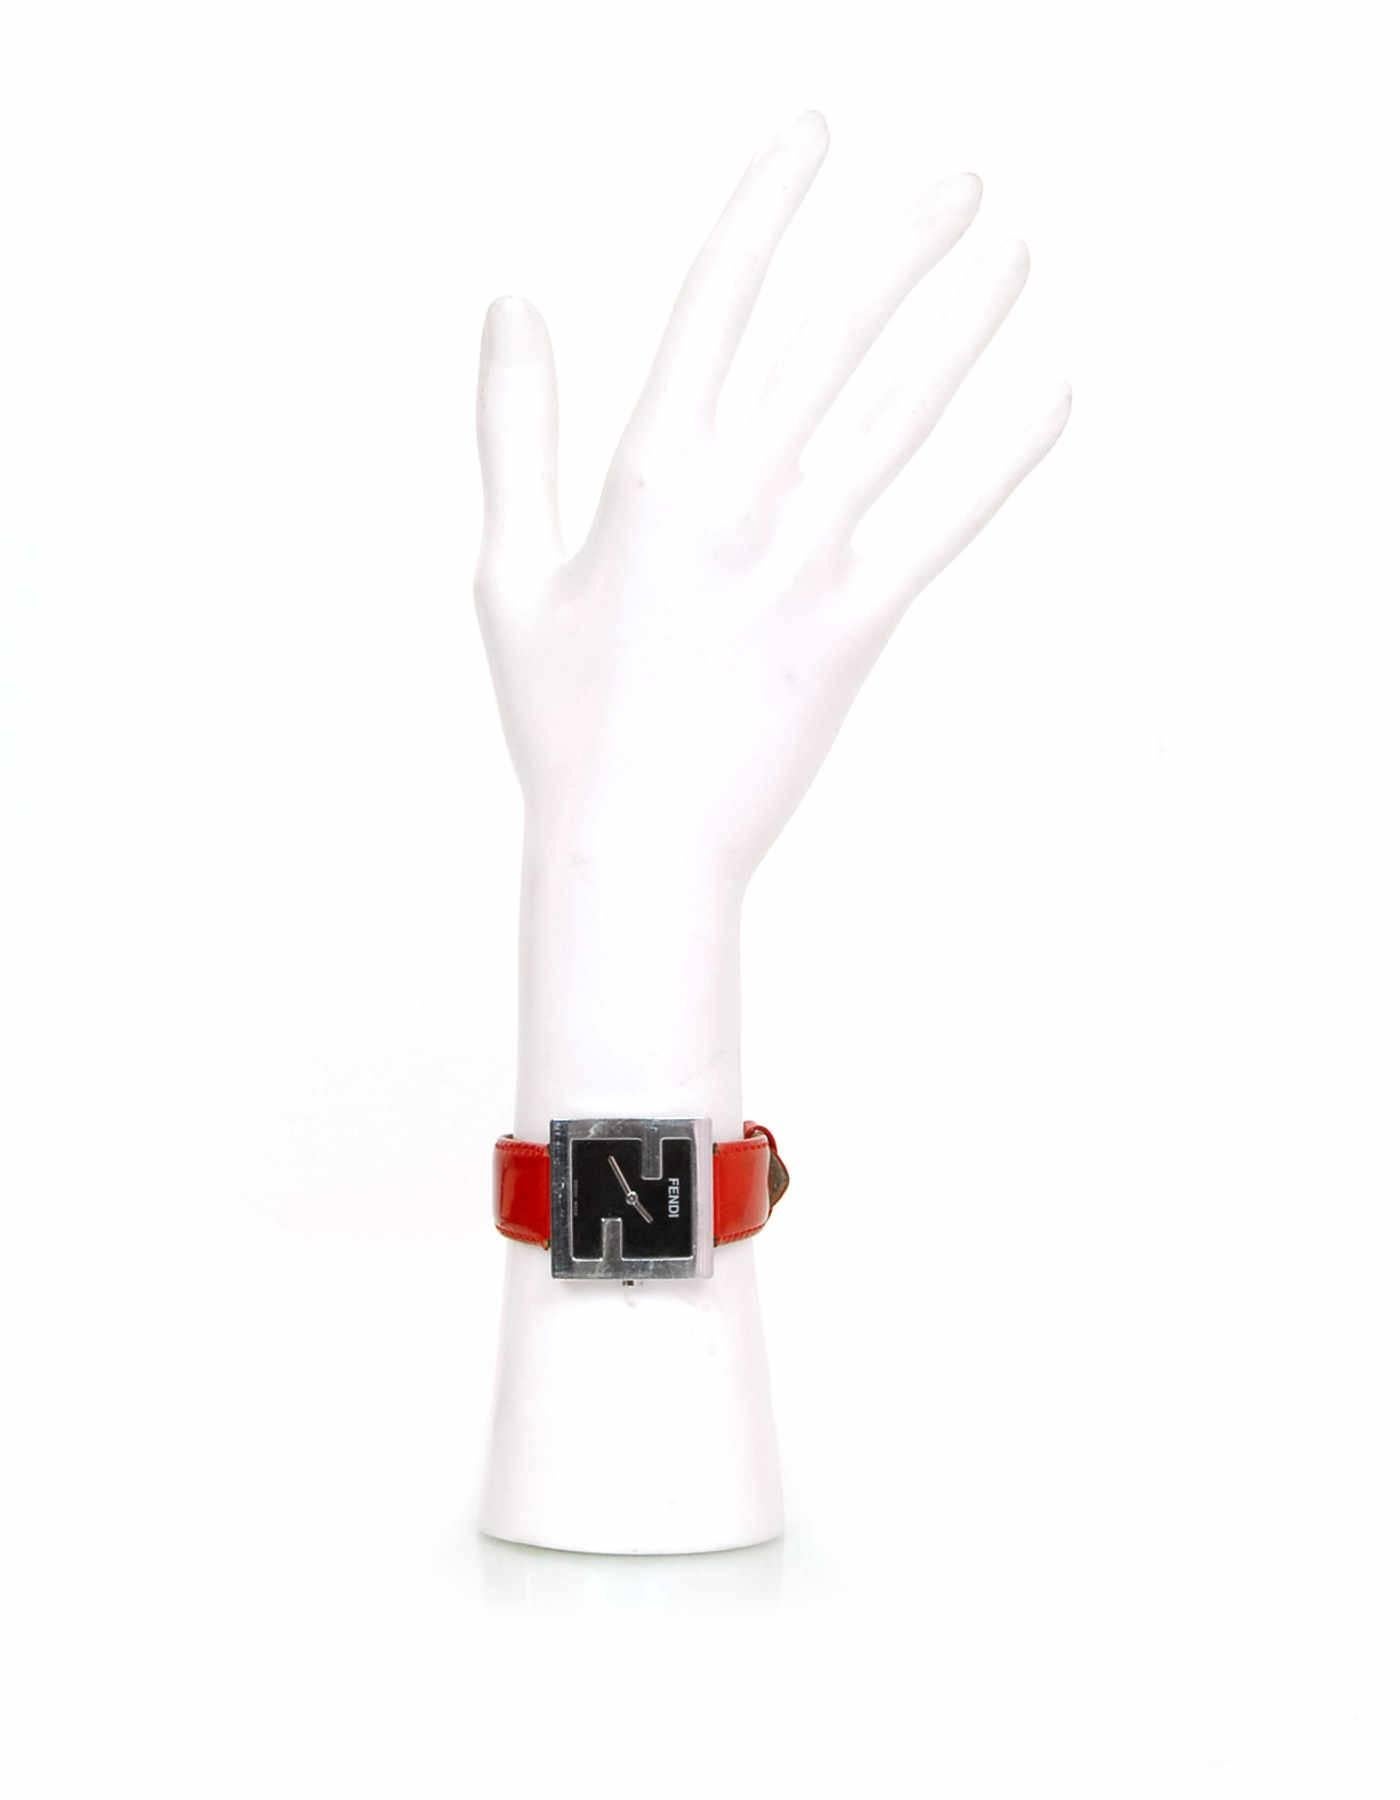 Fendi Red Patent Leather Logo Watch

Made In: Switzerland
Color: Red, black, silver
Materials: Patent leather, metal
Closure: Buckle closure
Overall Condition: Very good pre-owned condition with the exception of surface marks throughout, soiling at